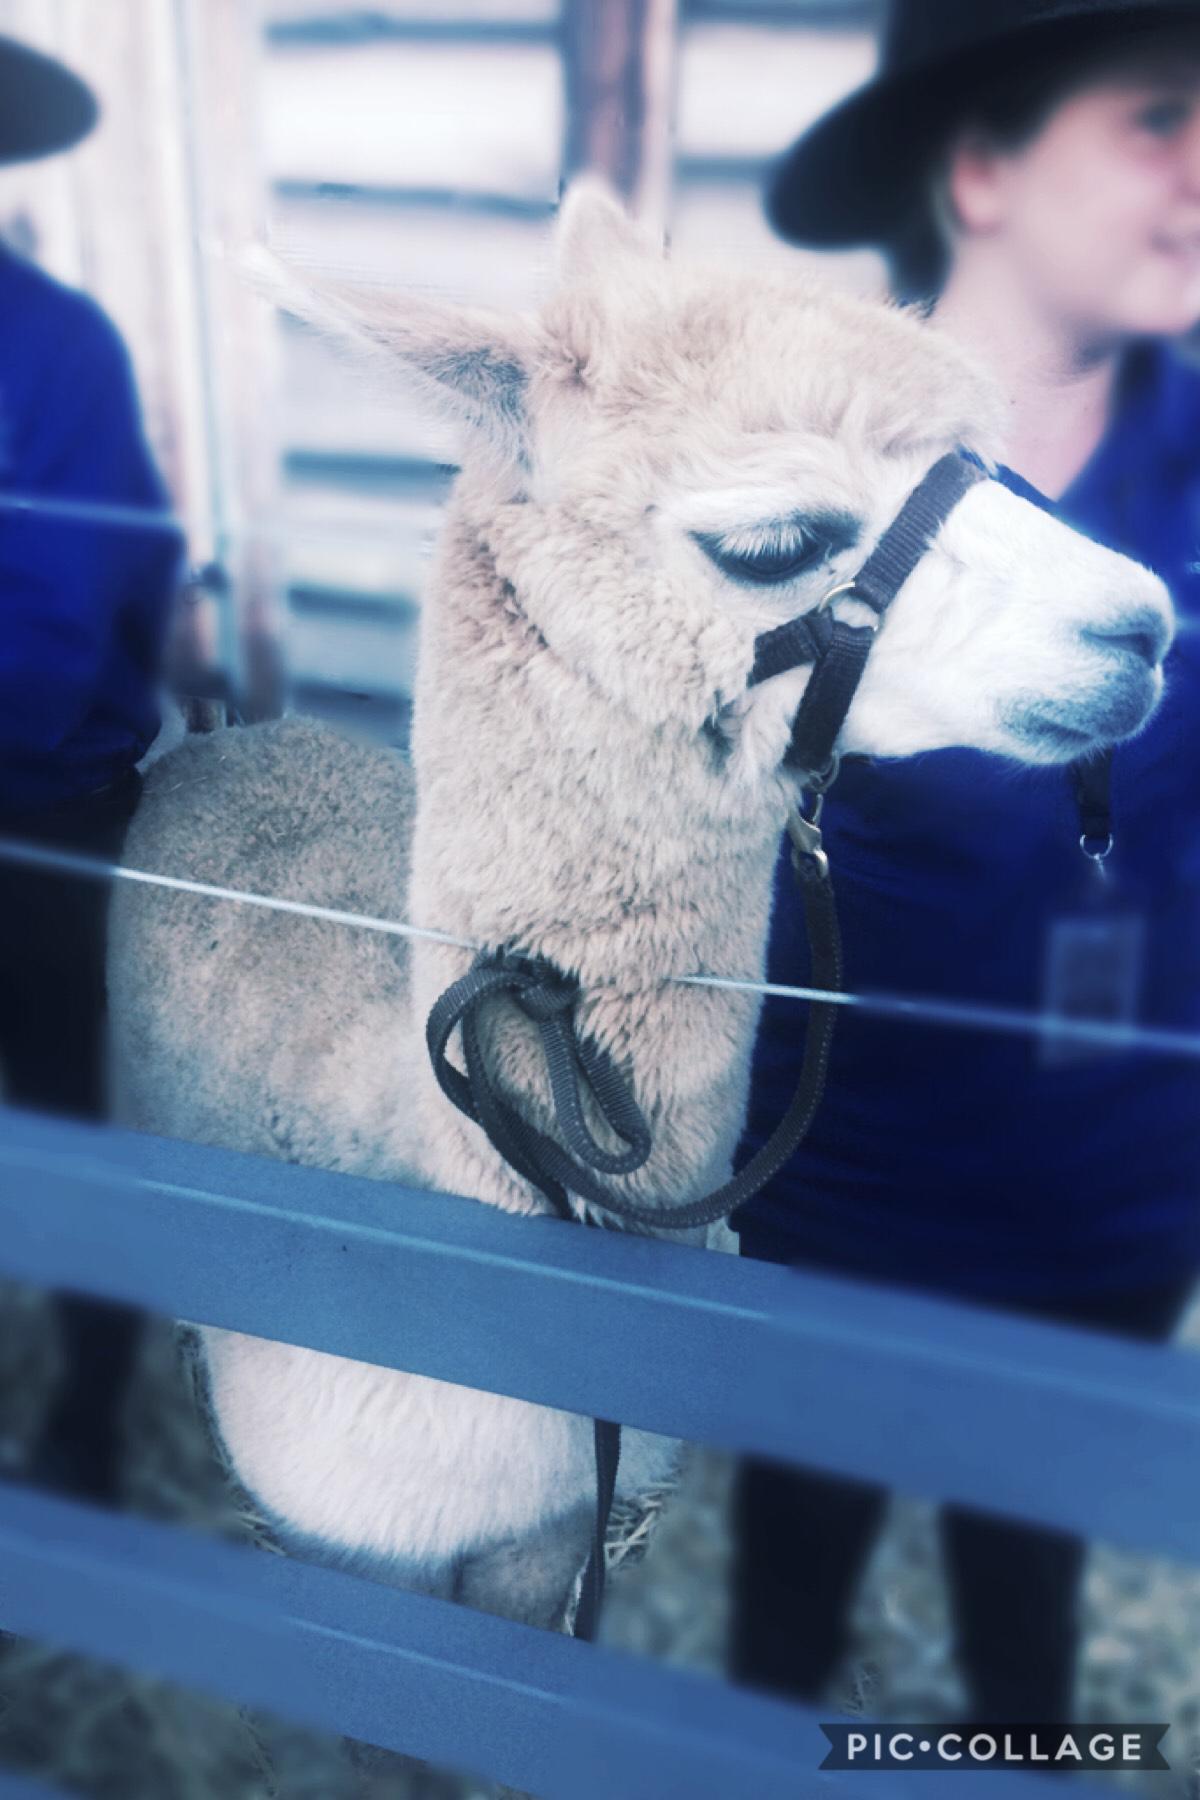 #17 Whoa y’all I met an alpaca! It was amazing! And luckily it didn’t spit at me 😂 if you don’t like alpacas, I don’t know what is wrong with you... 
jkkkk